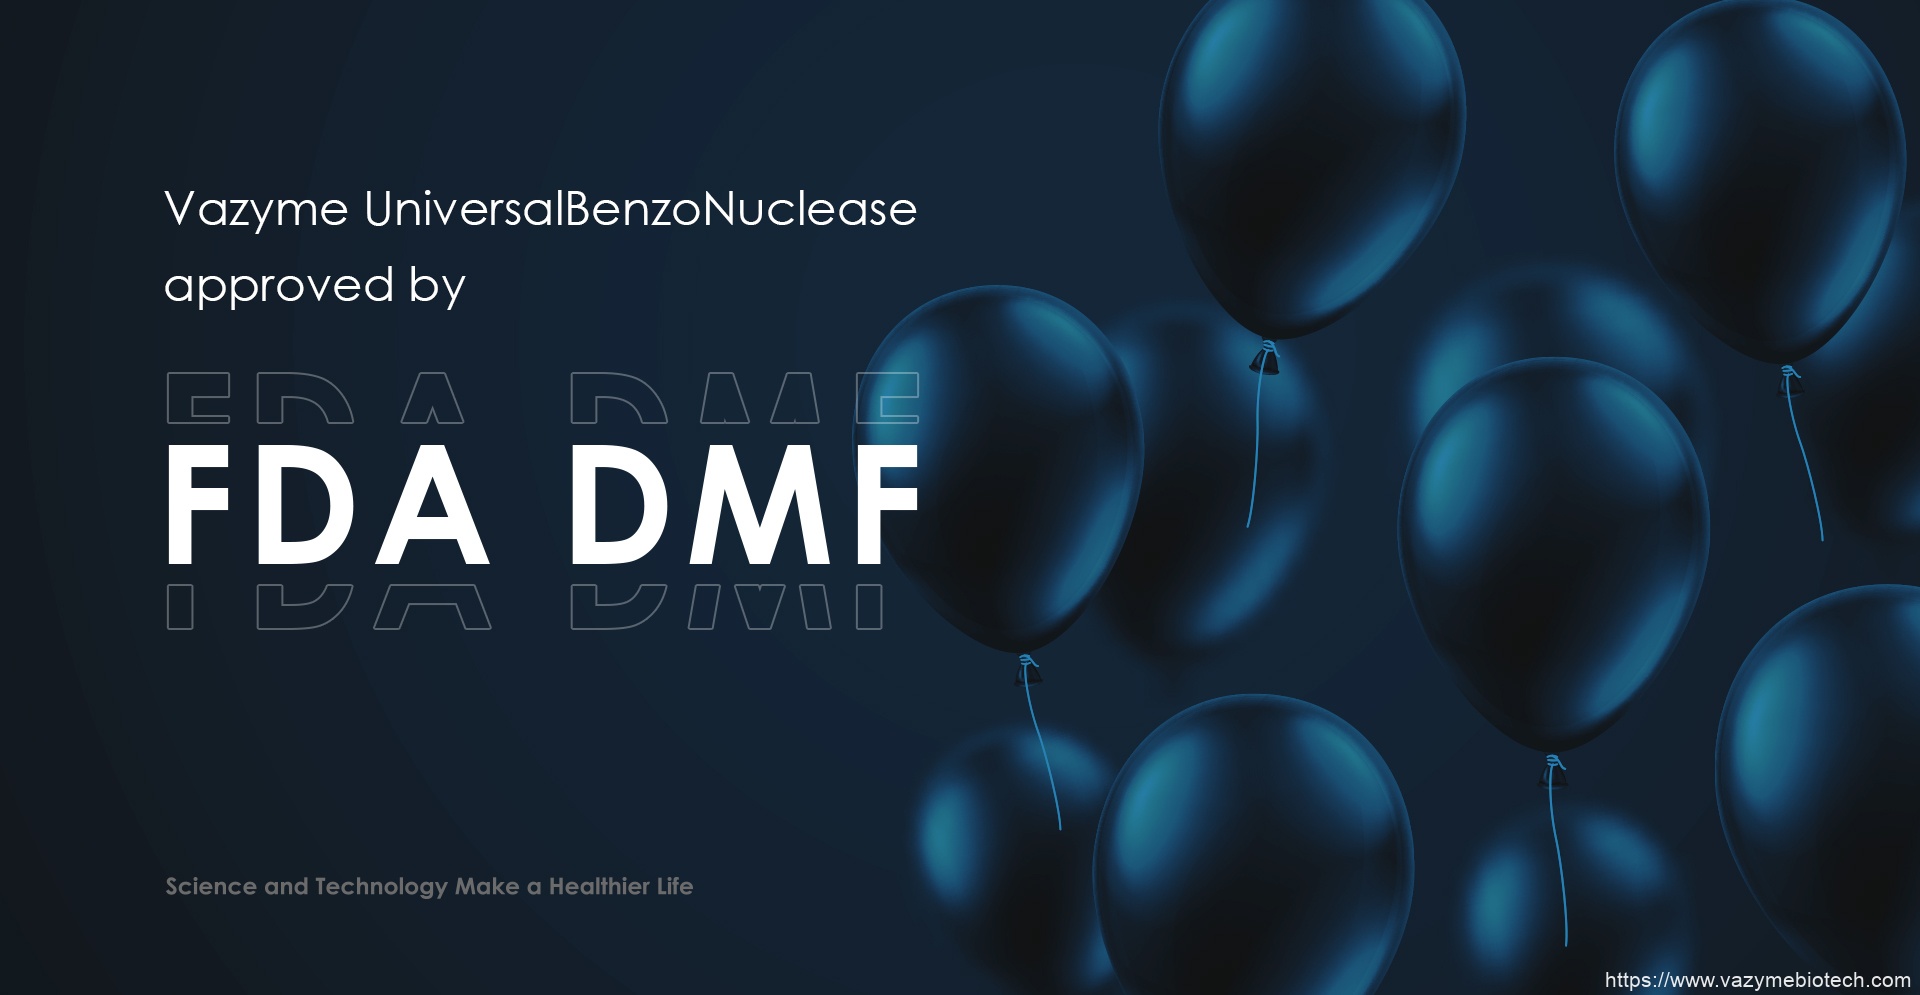 Universal Benzo Nuclease